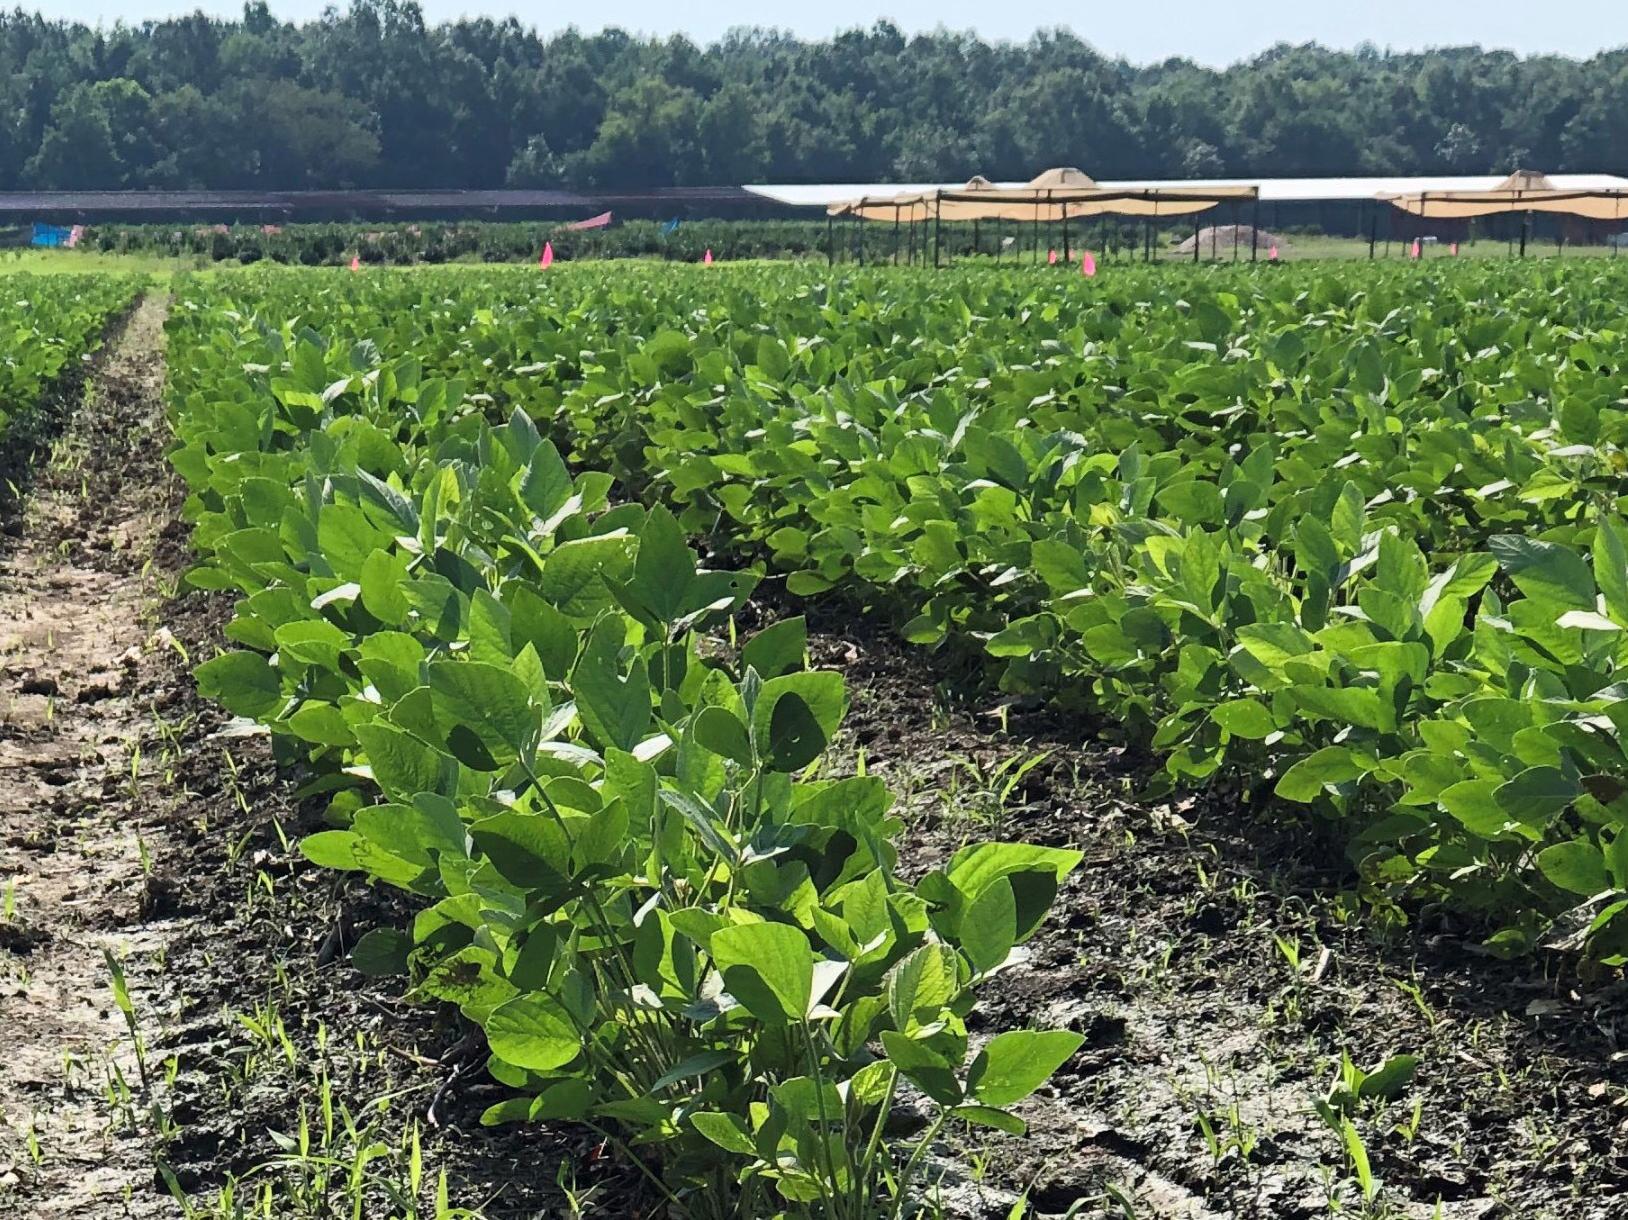 Rows of young soybean plants sticking a foot above ground.